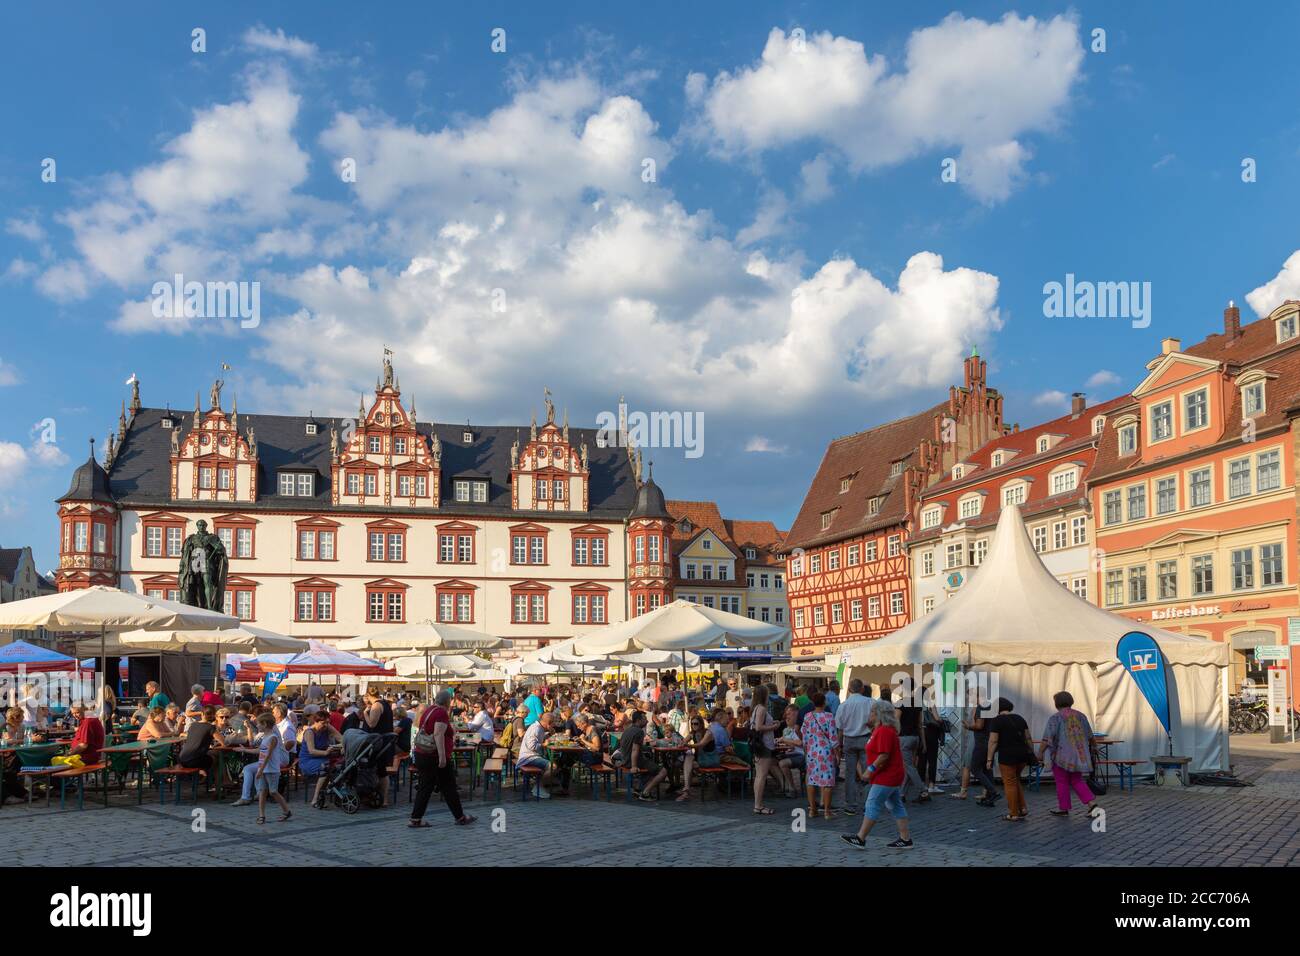 Coburg, Germany - August 31, 2019 -  Beer festival on the Marktplatz (market square) in the center of old town of Coburg in Bavaria, Germany Stock Photo